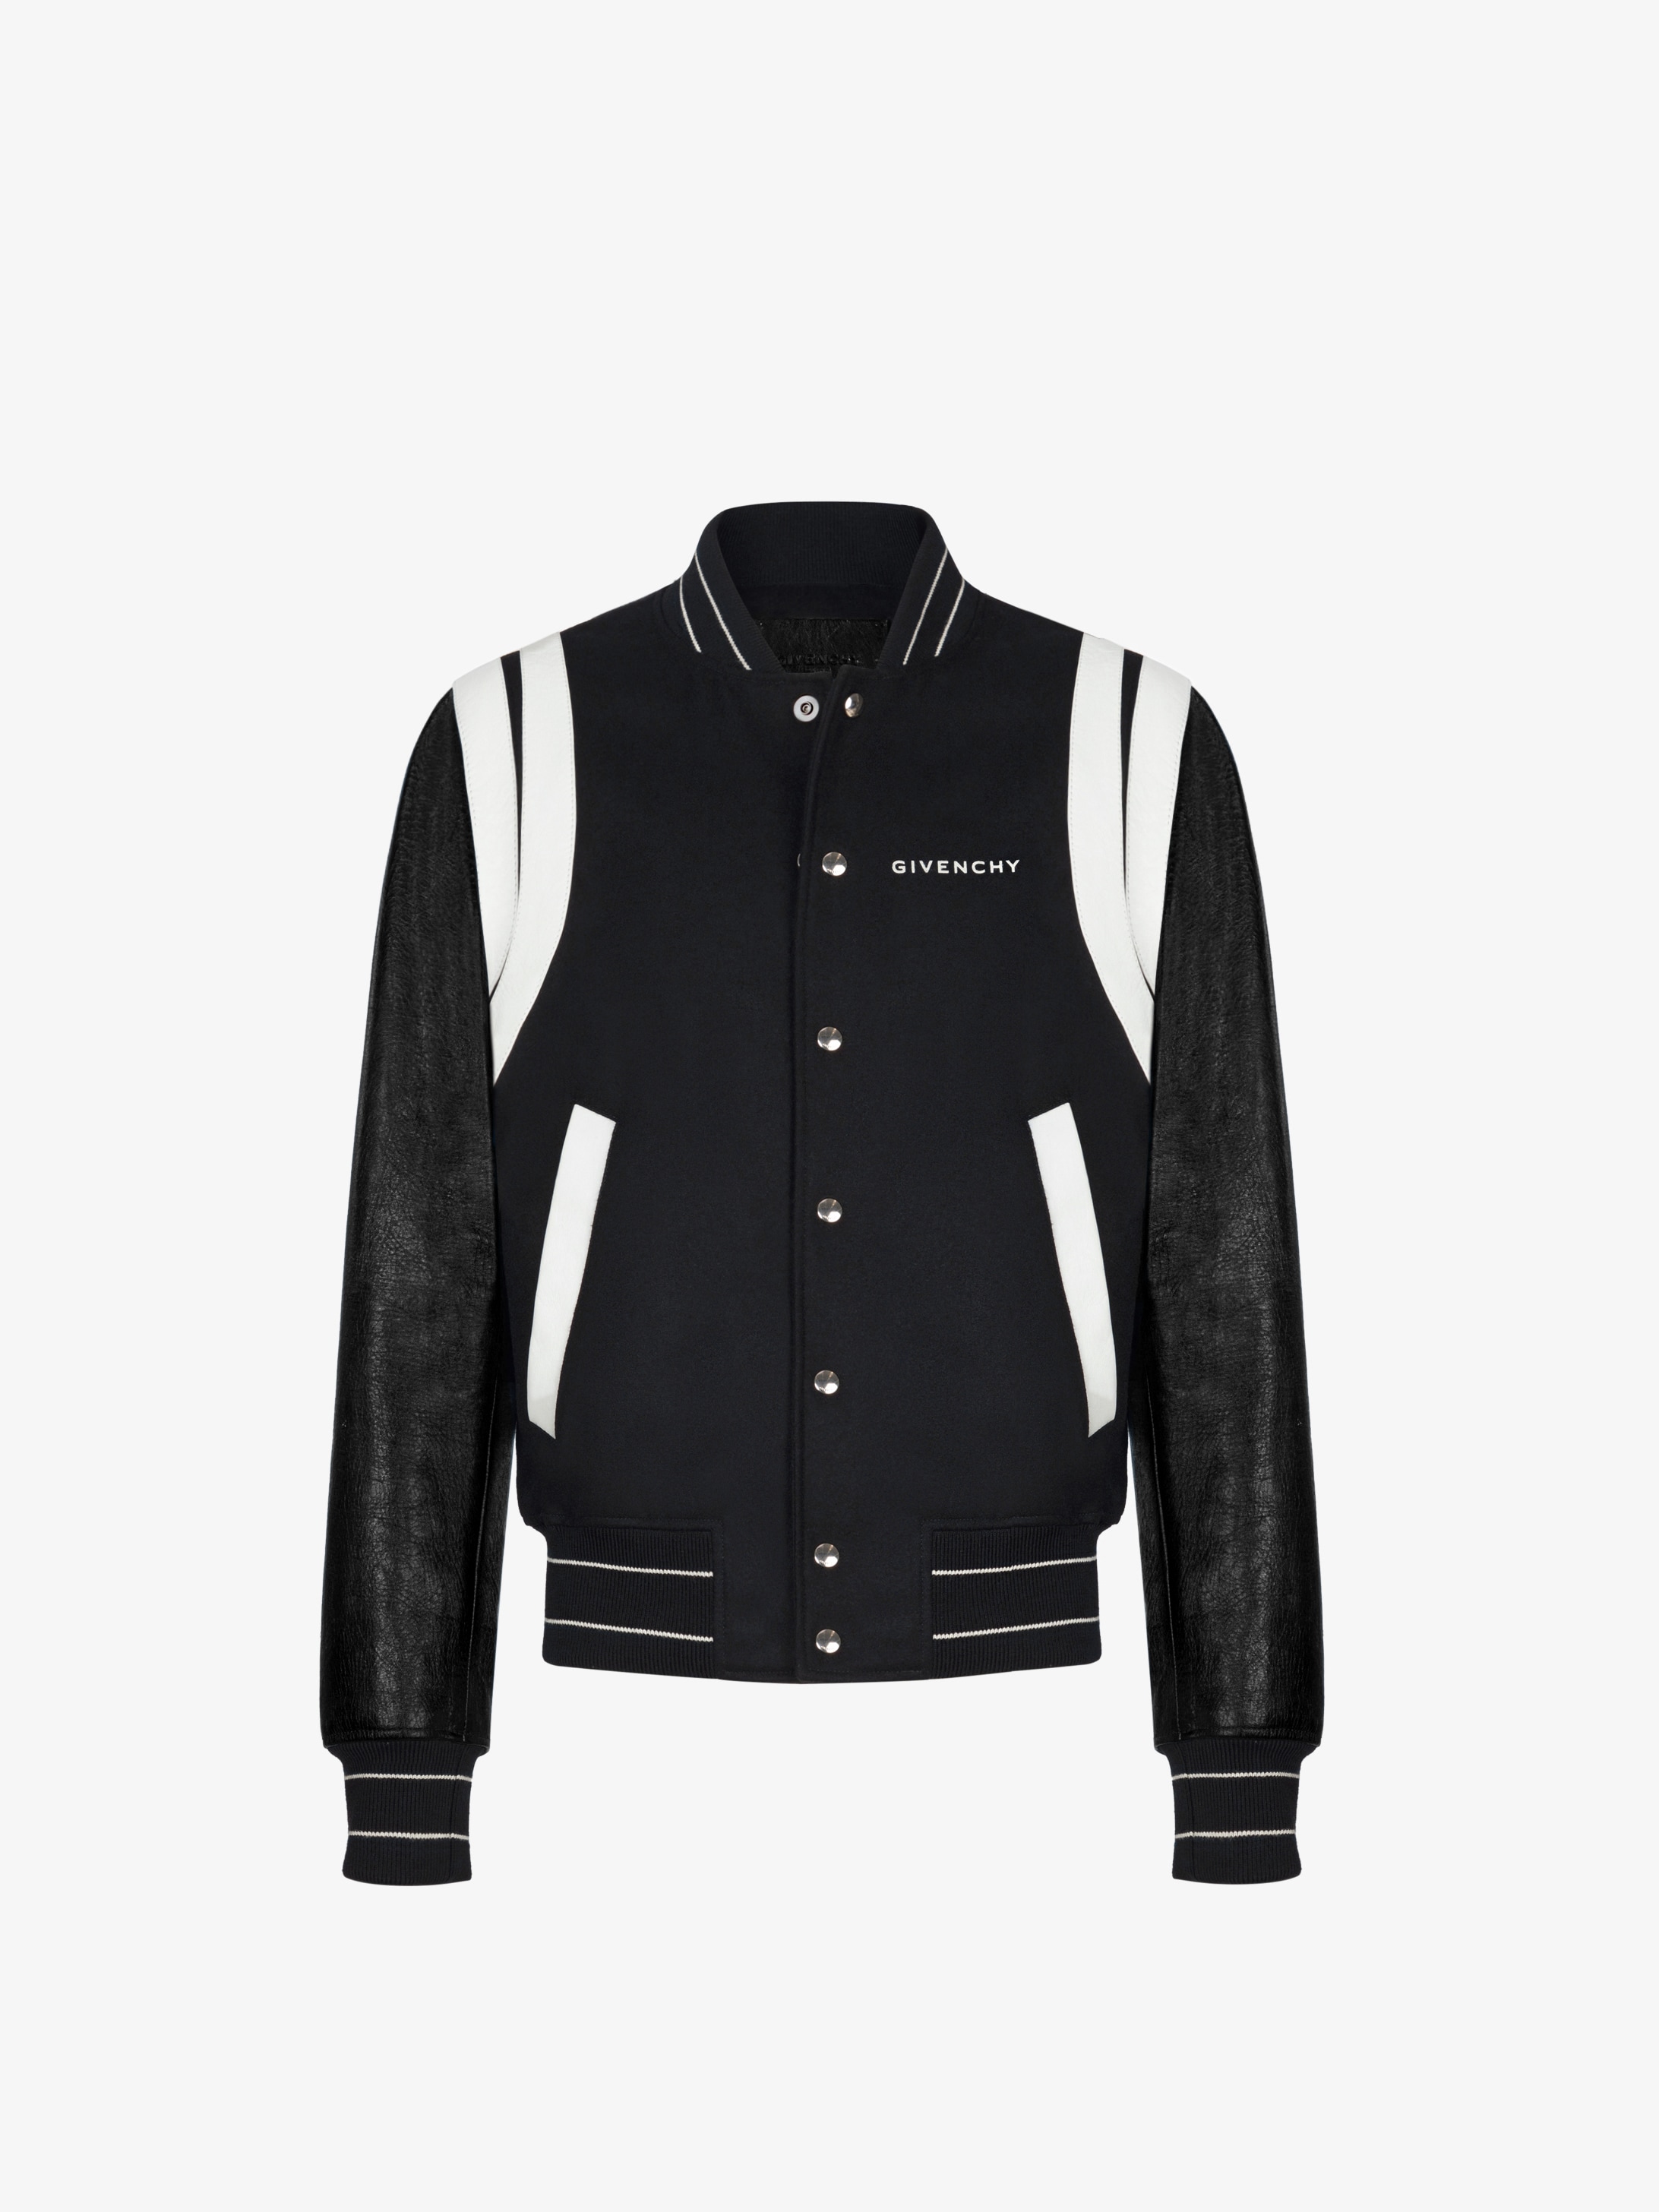 GIVENCHY bomber jacket in wool and 